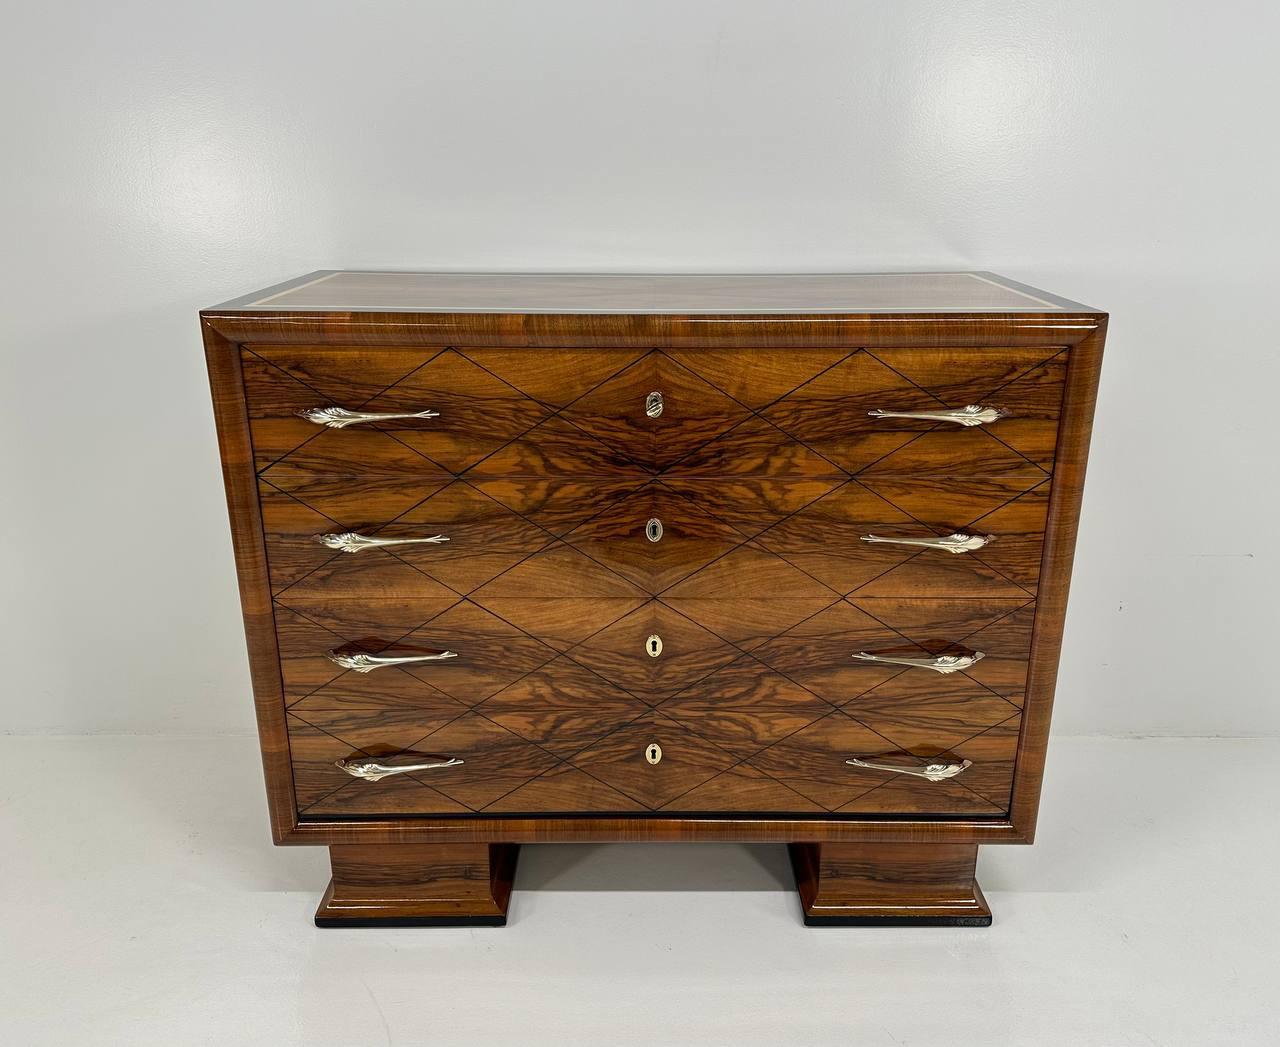 This Art Deco dresser was produced in Italy in the 1940s.
It is completely made of walnut briar with black lacquered geometric decorative lines on the drawers and two profiles, one black lacquered and one gold leafed, on the top. 
The handles and